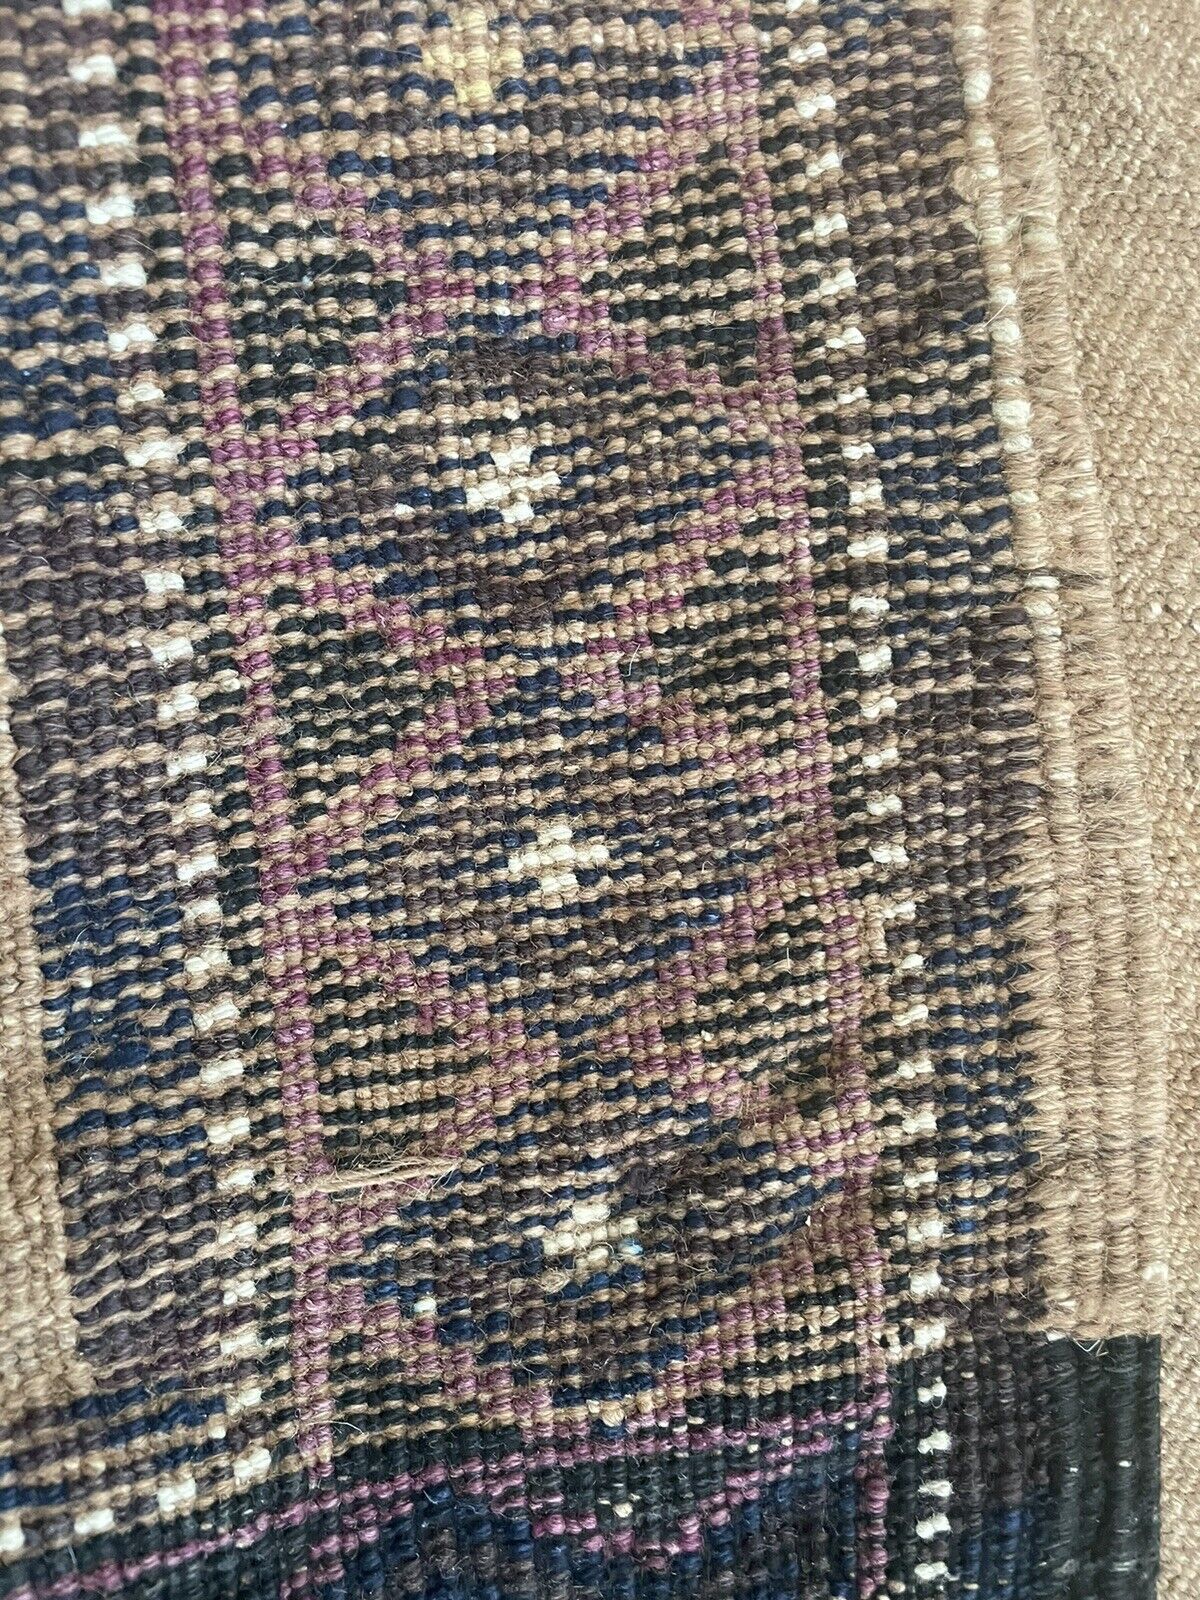 Back side of the Handmade Antique Afghan Baluch Collectible Rug - Underside view revealing the rug's construction and material.